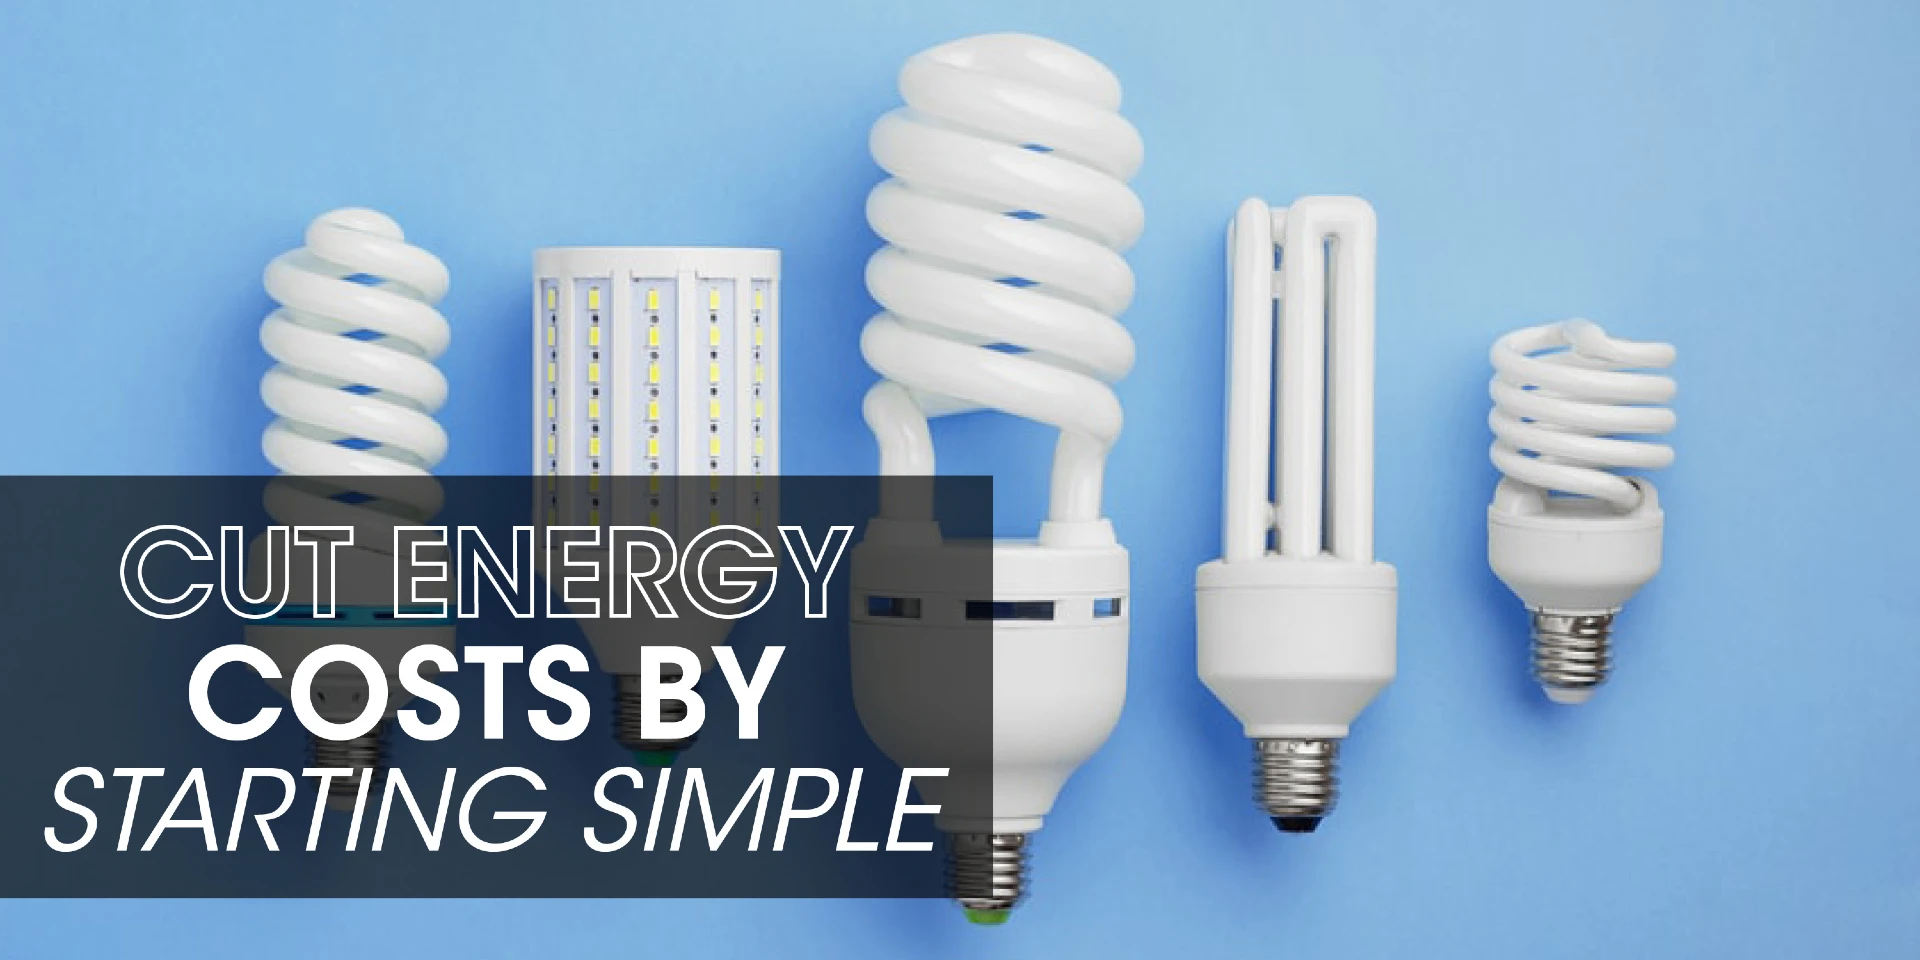 Light bulbs with text: "Cut energy costs by starting simple"